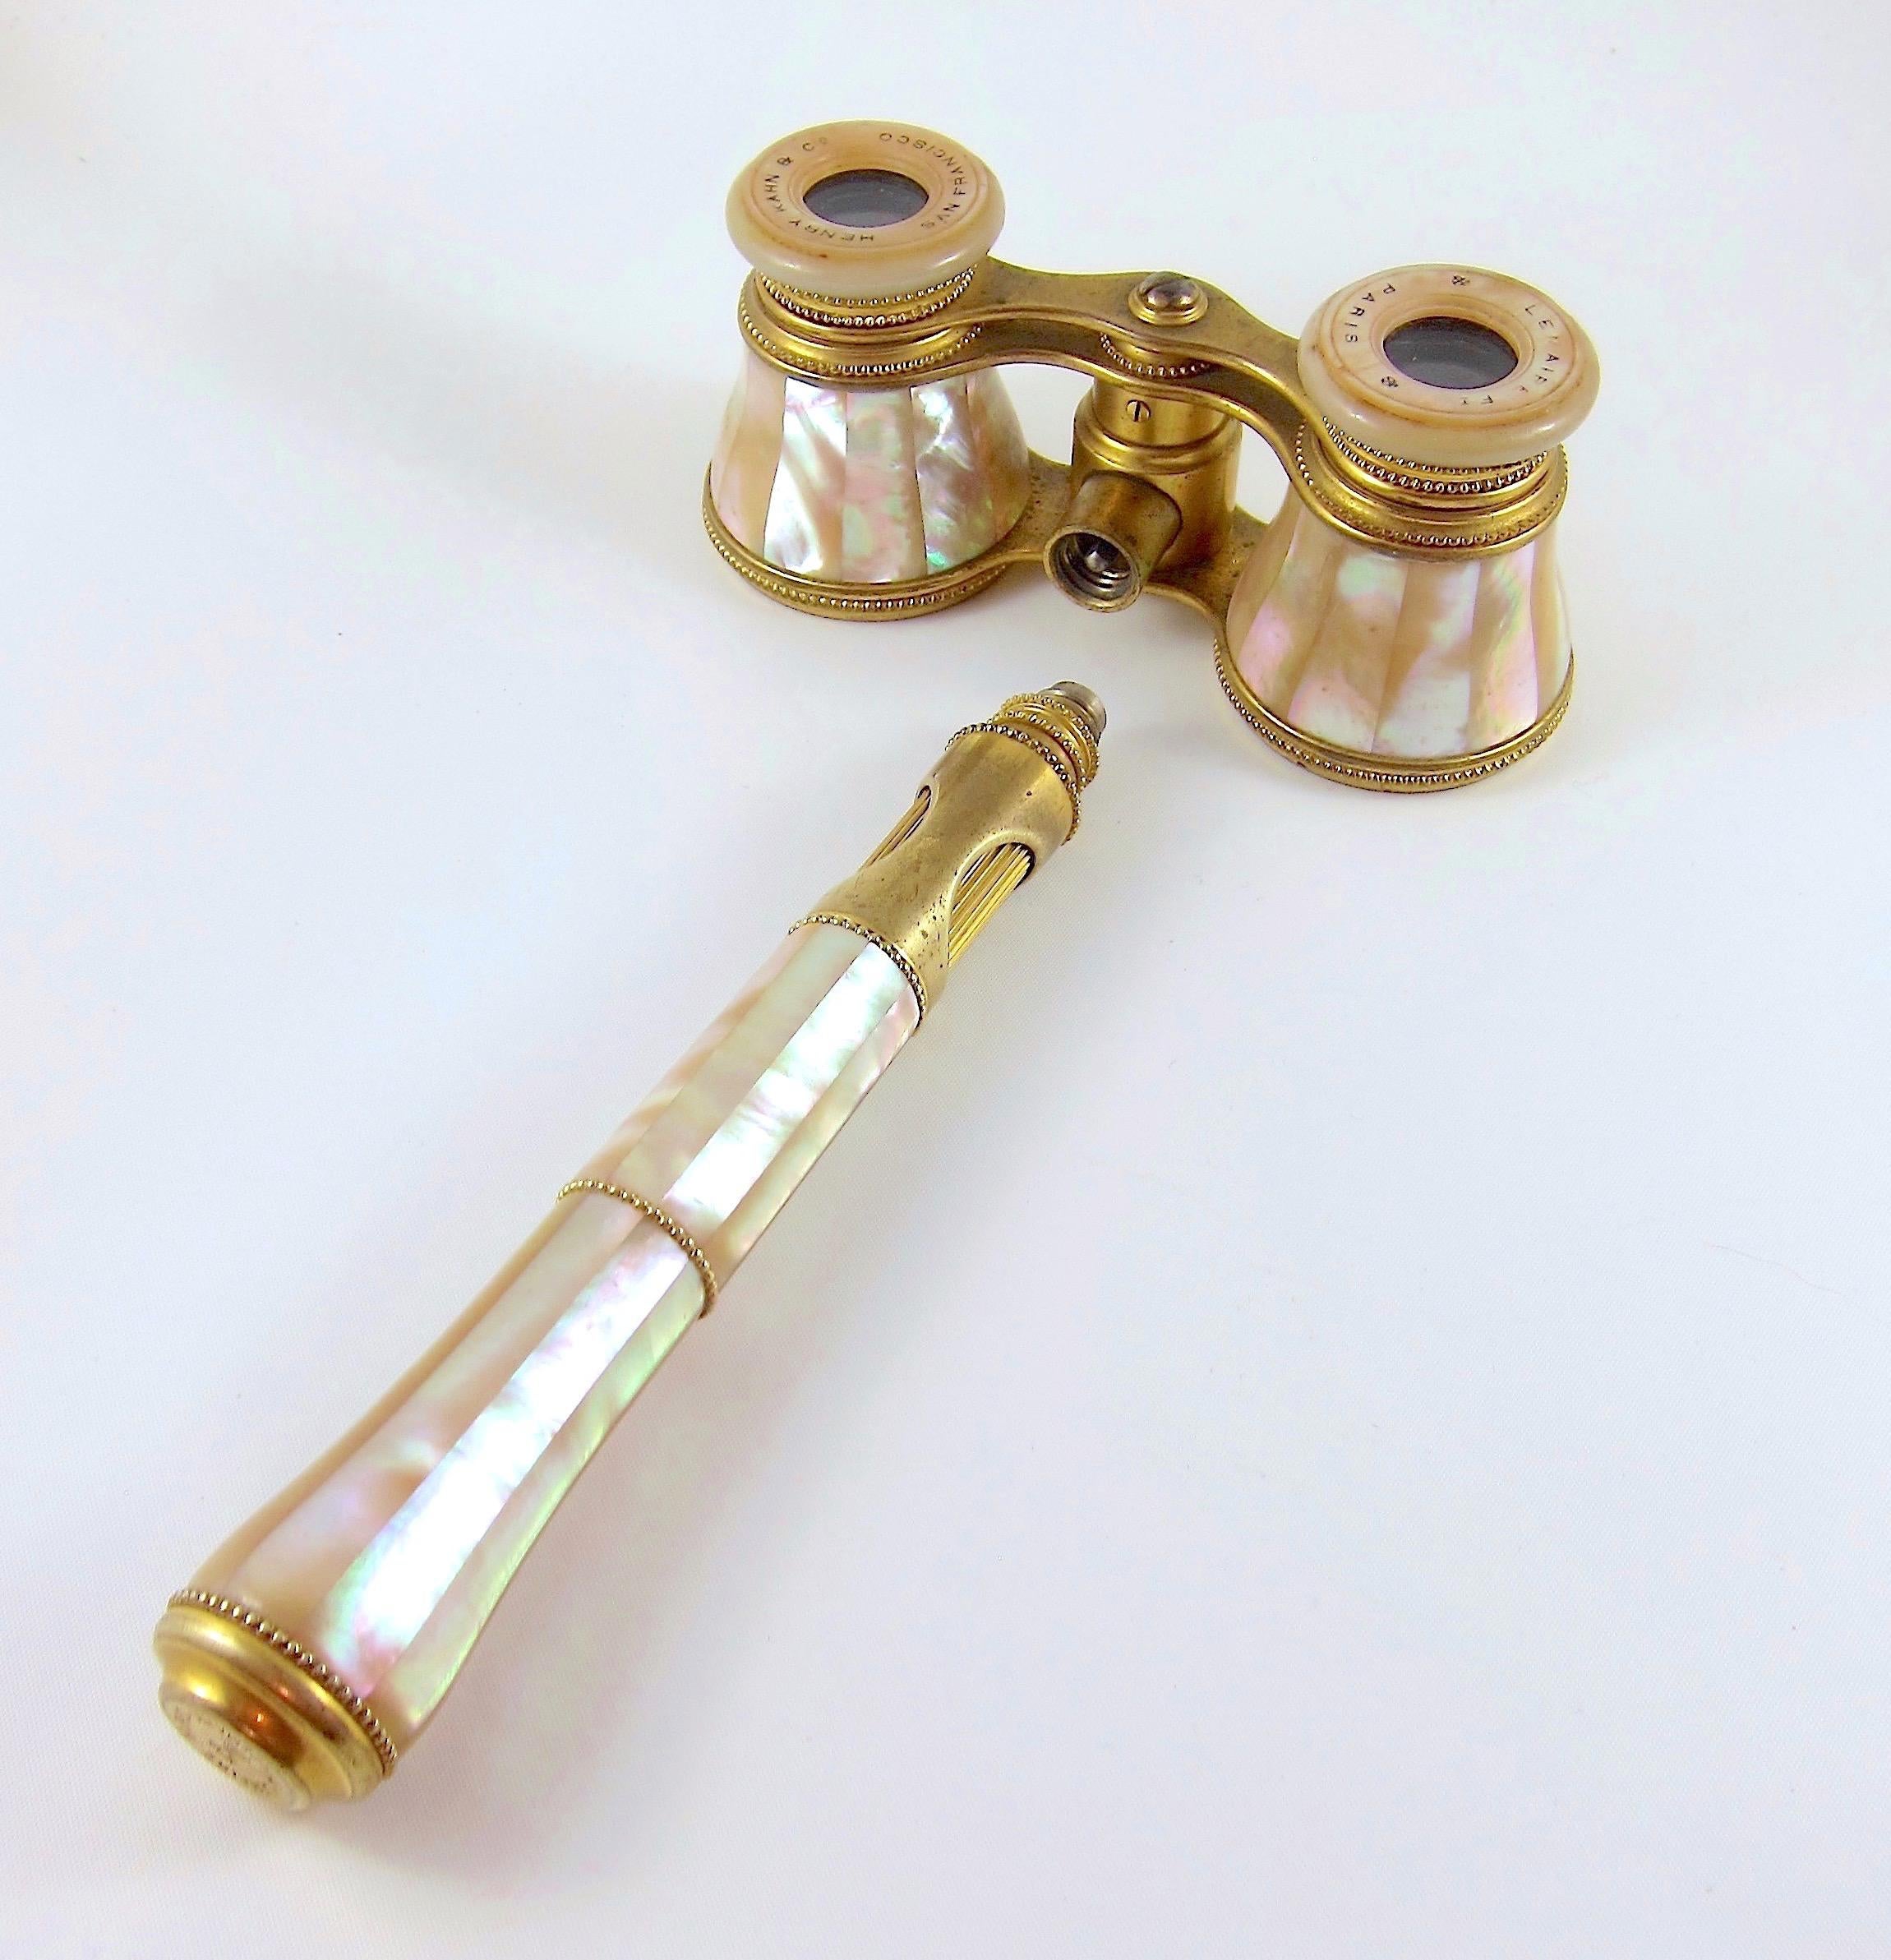 An elegant pair of antique French opera glasses with an unusual detachable handle. The small binoculars date to the late 19th century and were crafted at the height of the Belle Époque in gilt metal and mother of pearl by Lemaire of Paris. 

The